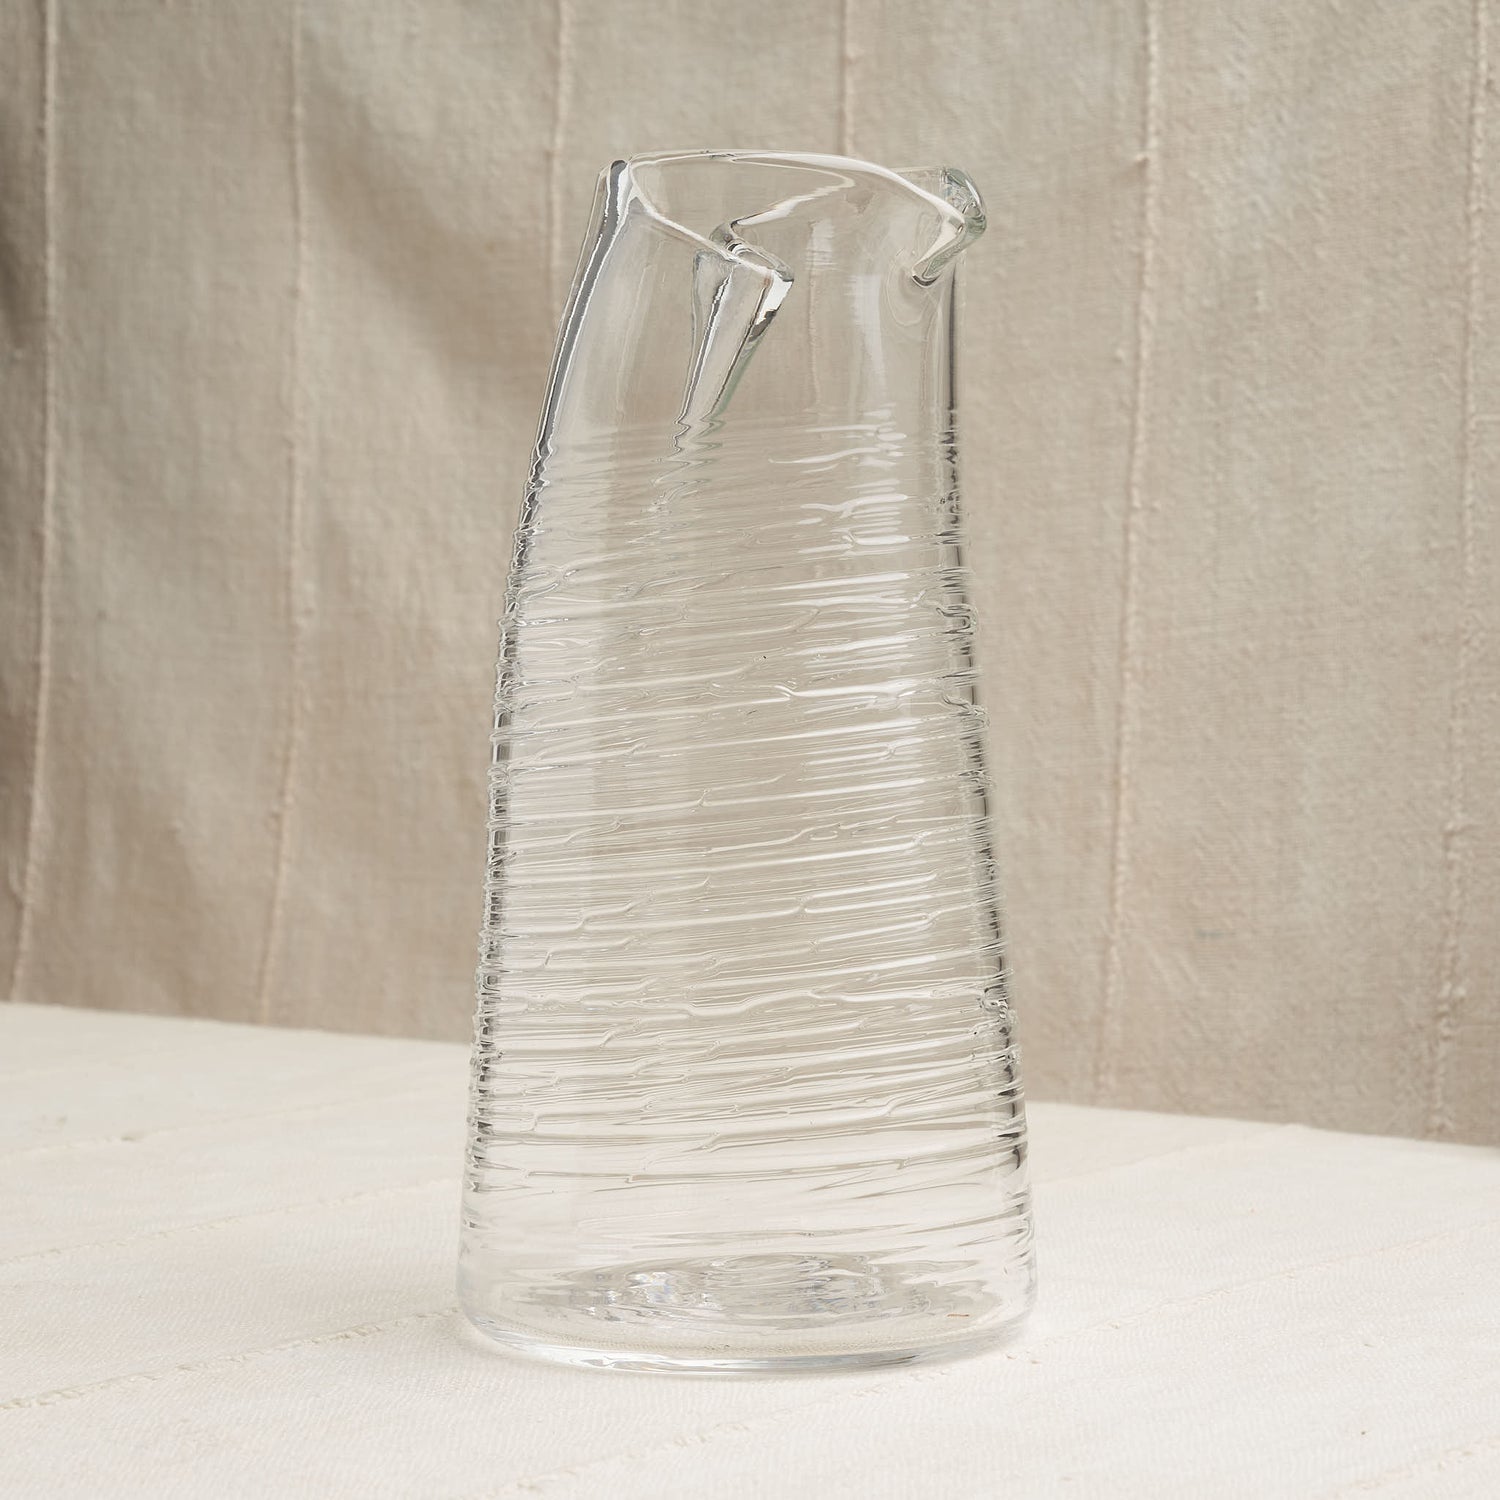 Handmade Glass Carafe and Cup (Pair) - Cool Water